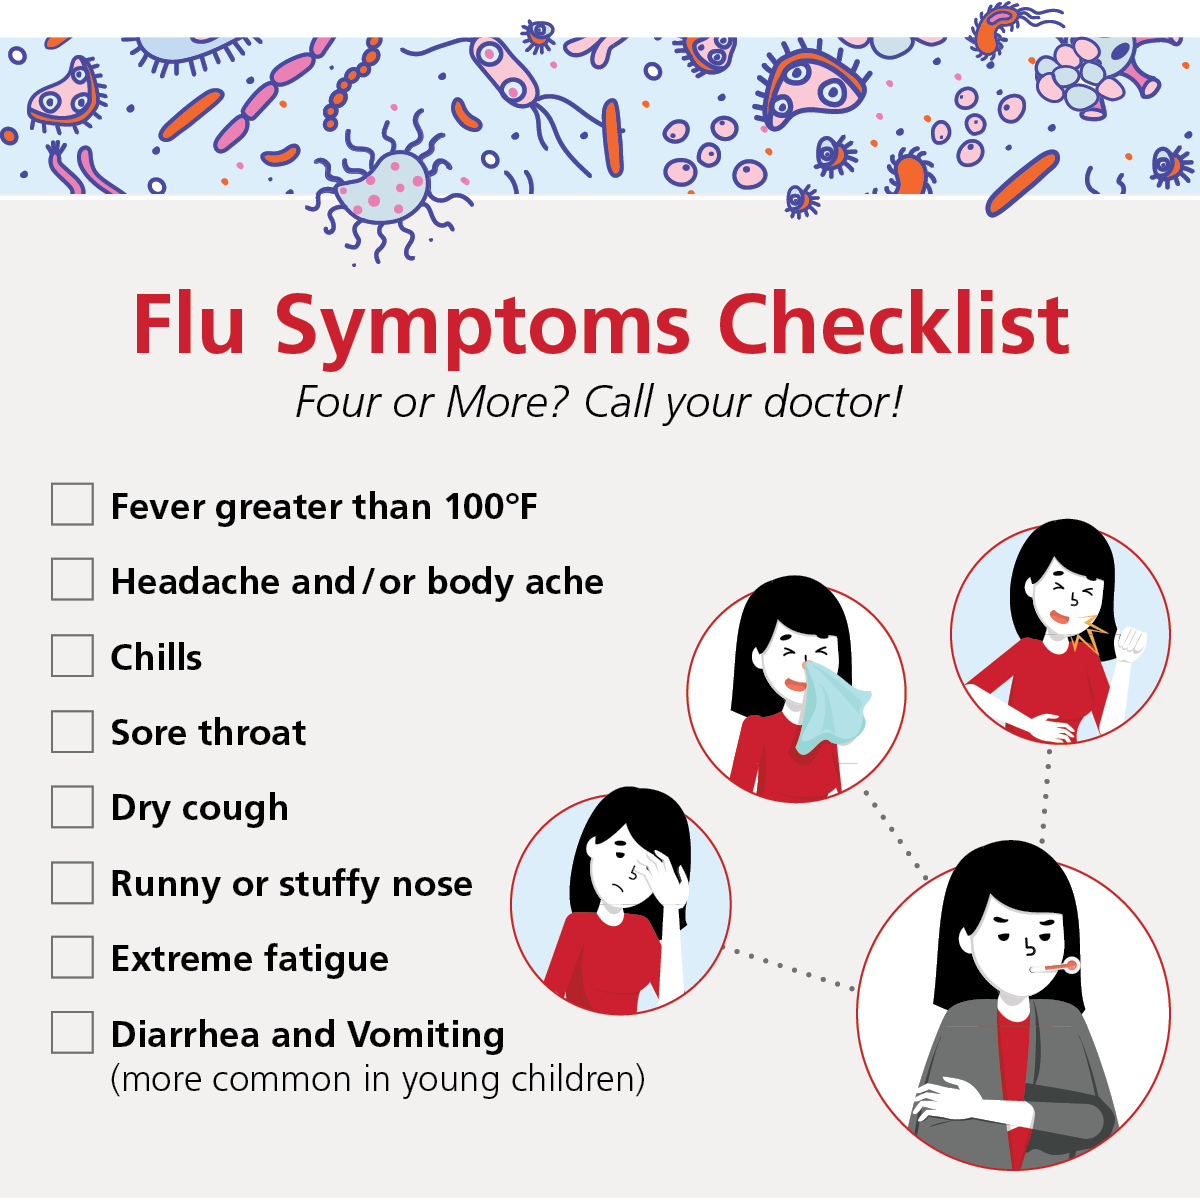 Is It the Flu or a Cold? Know the Symptoms During Flu Season